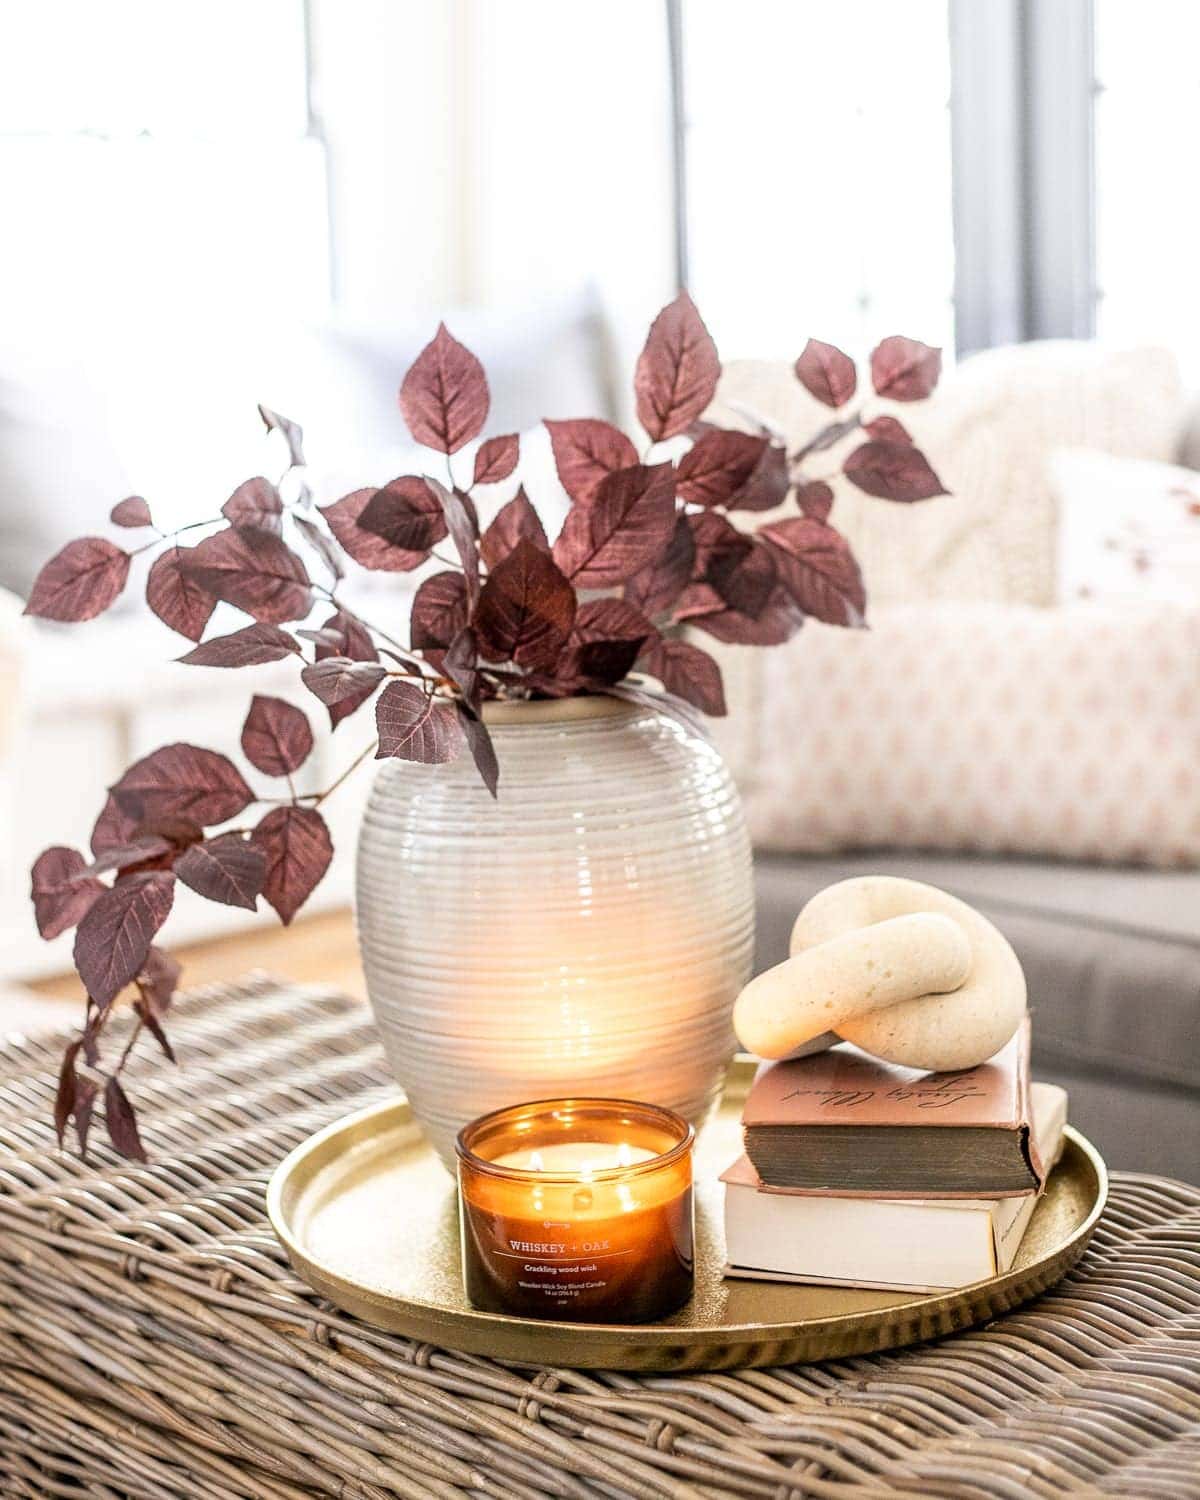 coffee table decor with tray, vase of fall branches, candle, and book stack